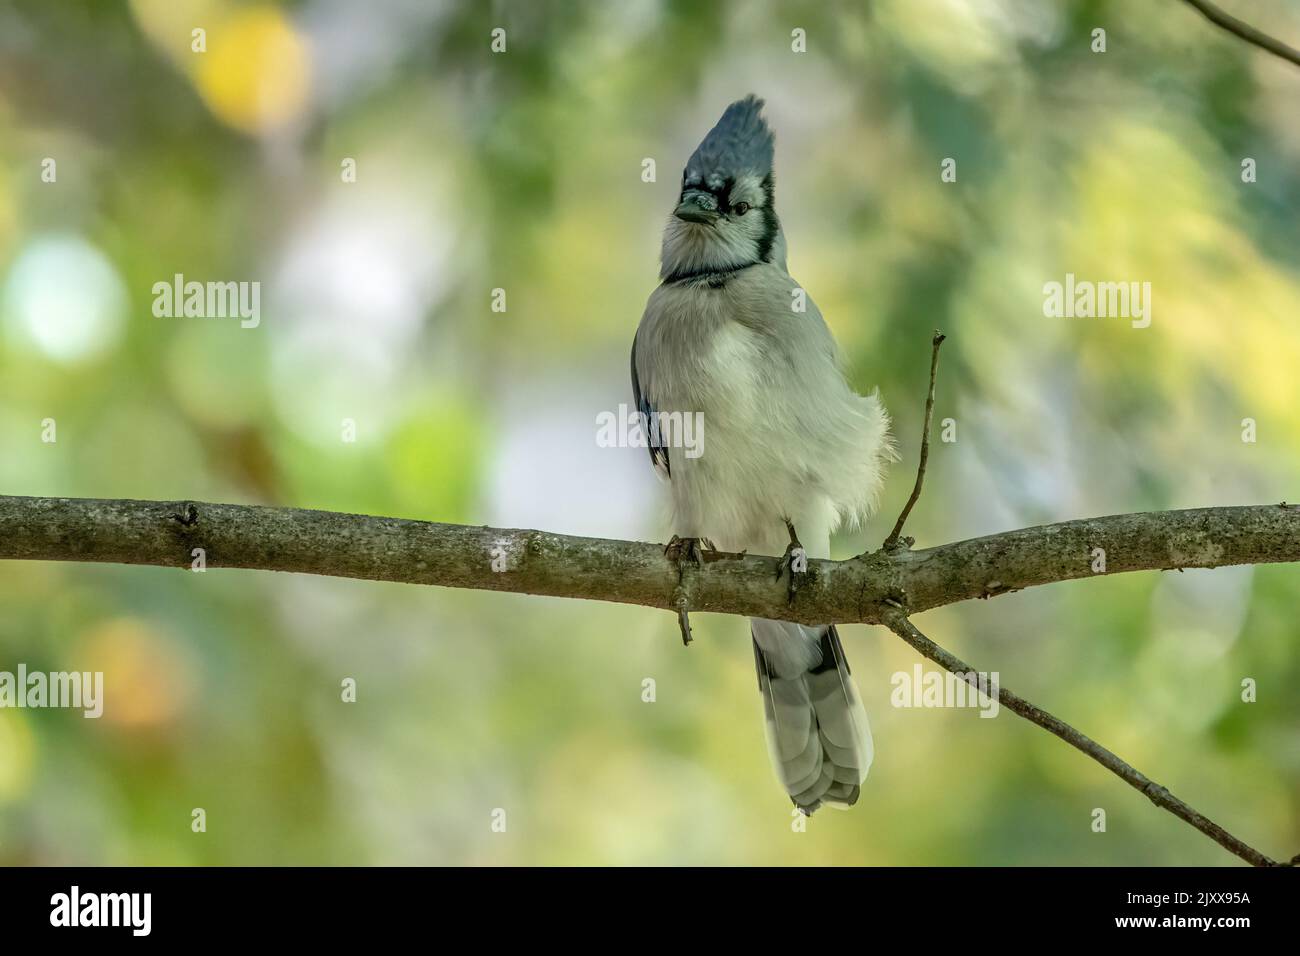 Bluejay perched on branch. Stock Photo